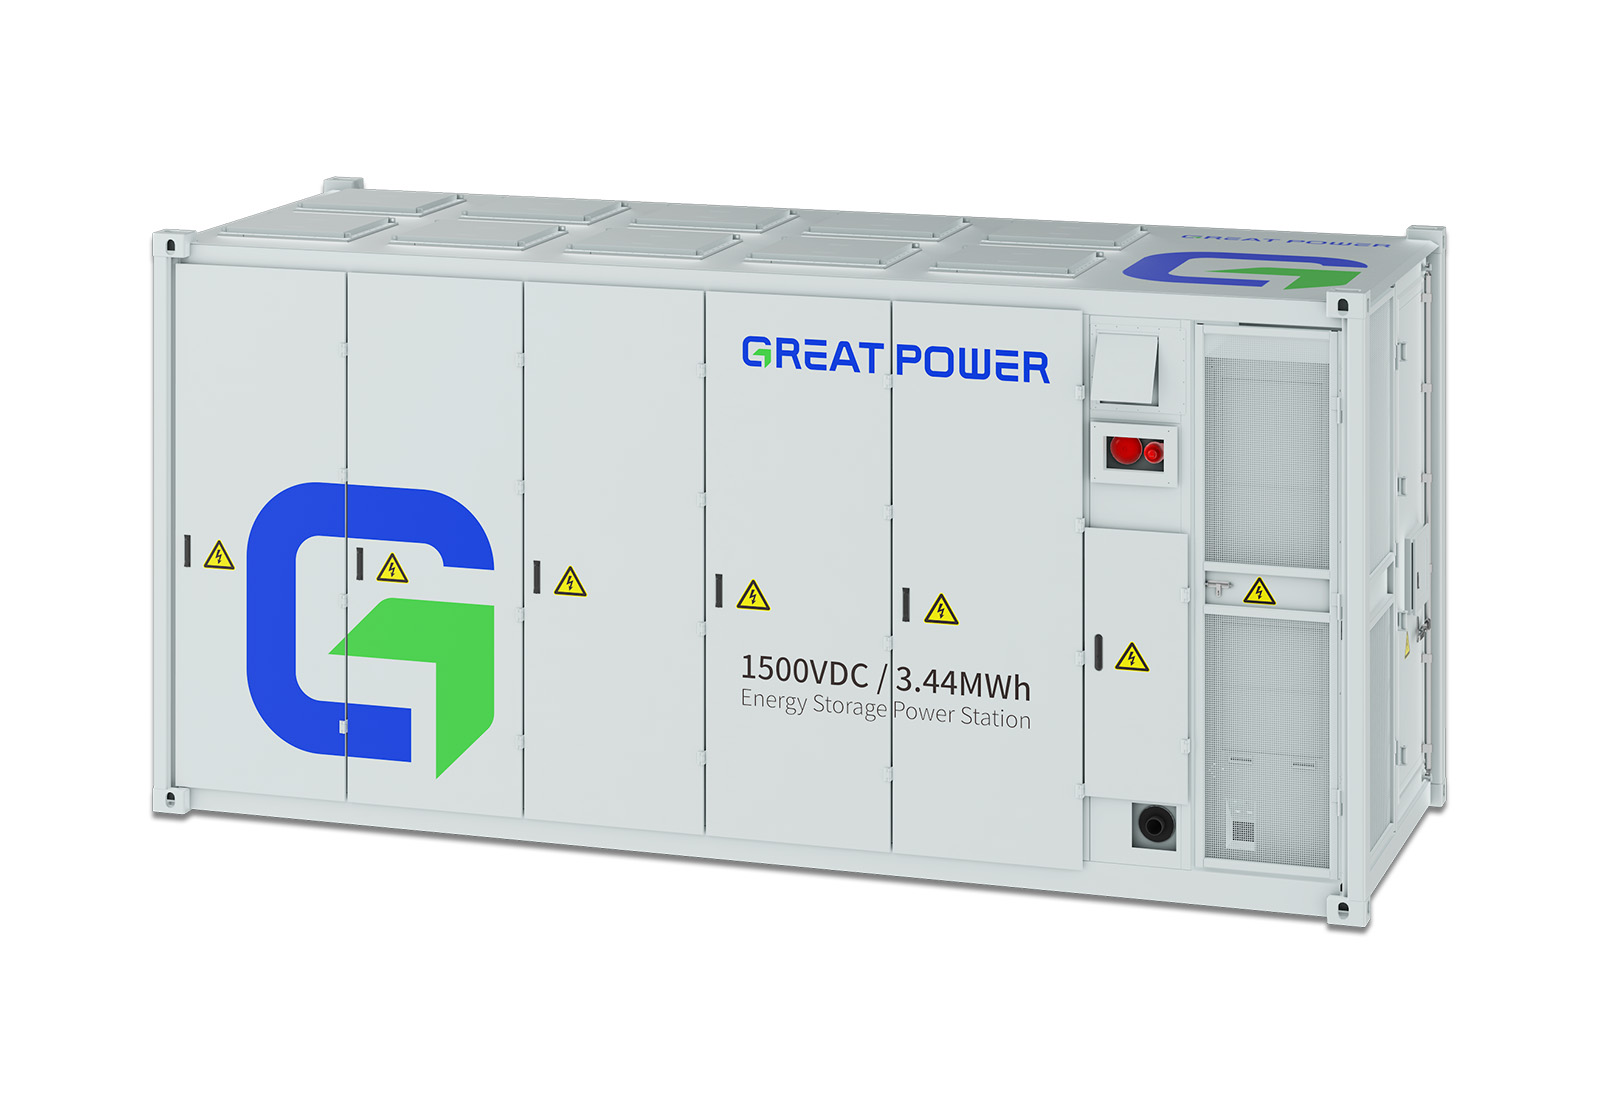 Containerized Energy Storage Solution